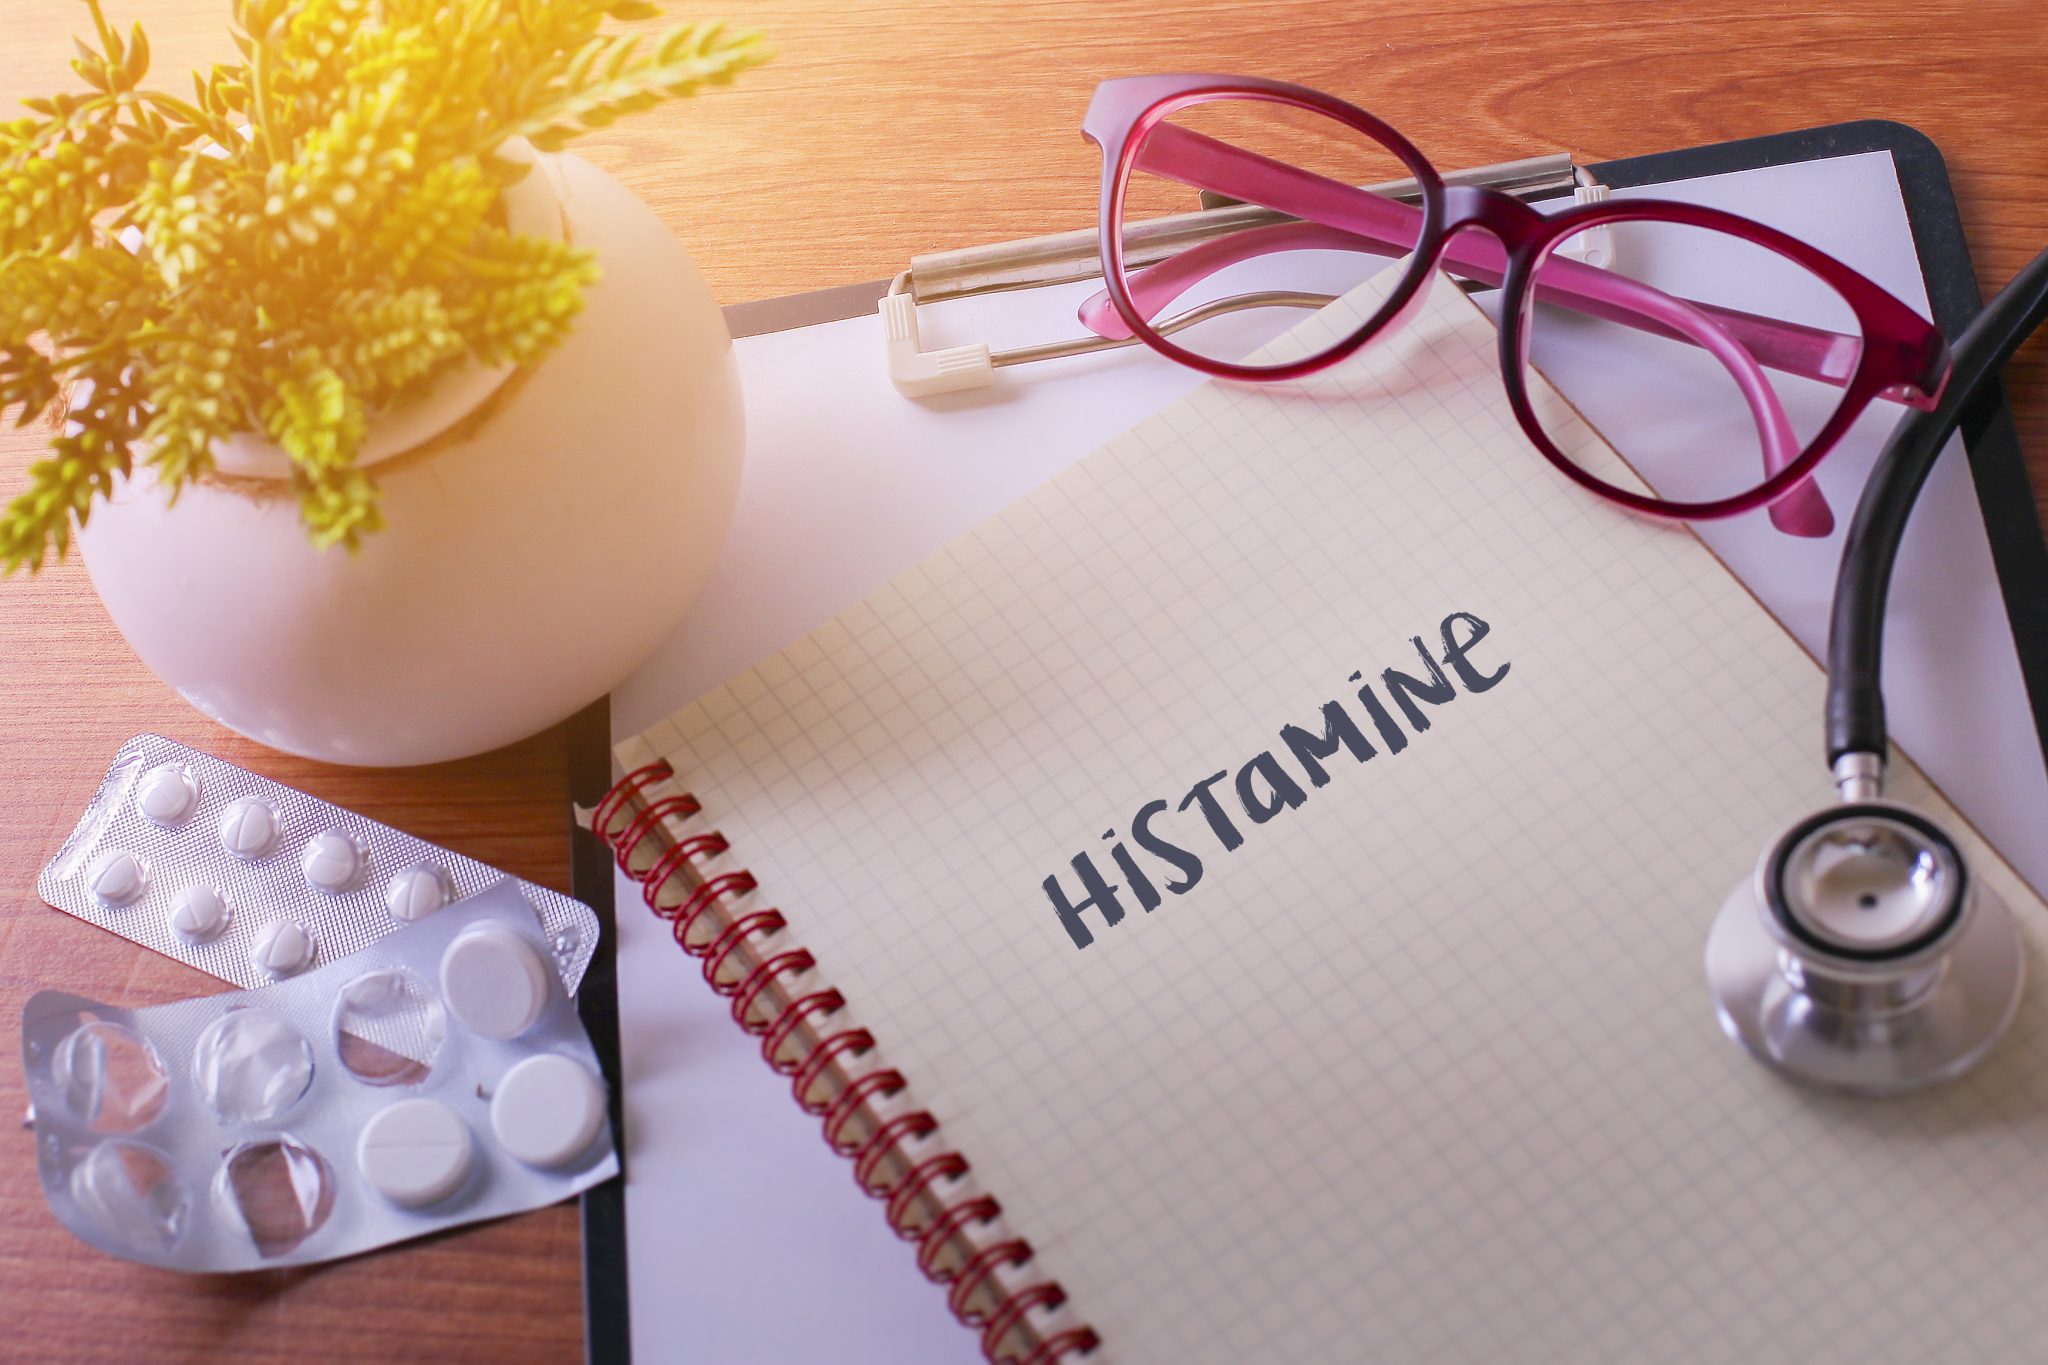 Histamine Intolerance and what you can do about it.